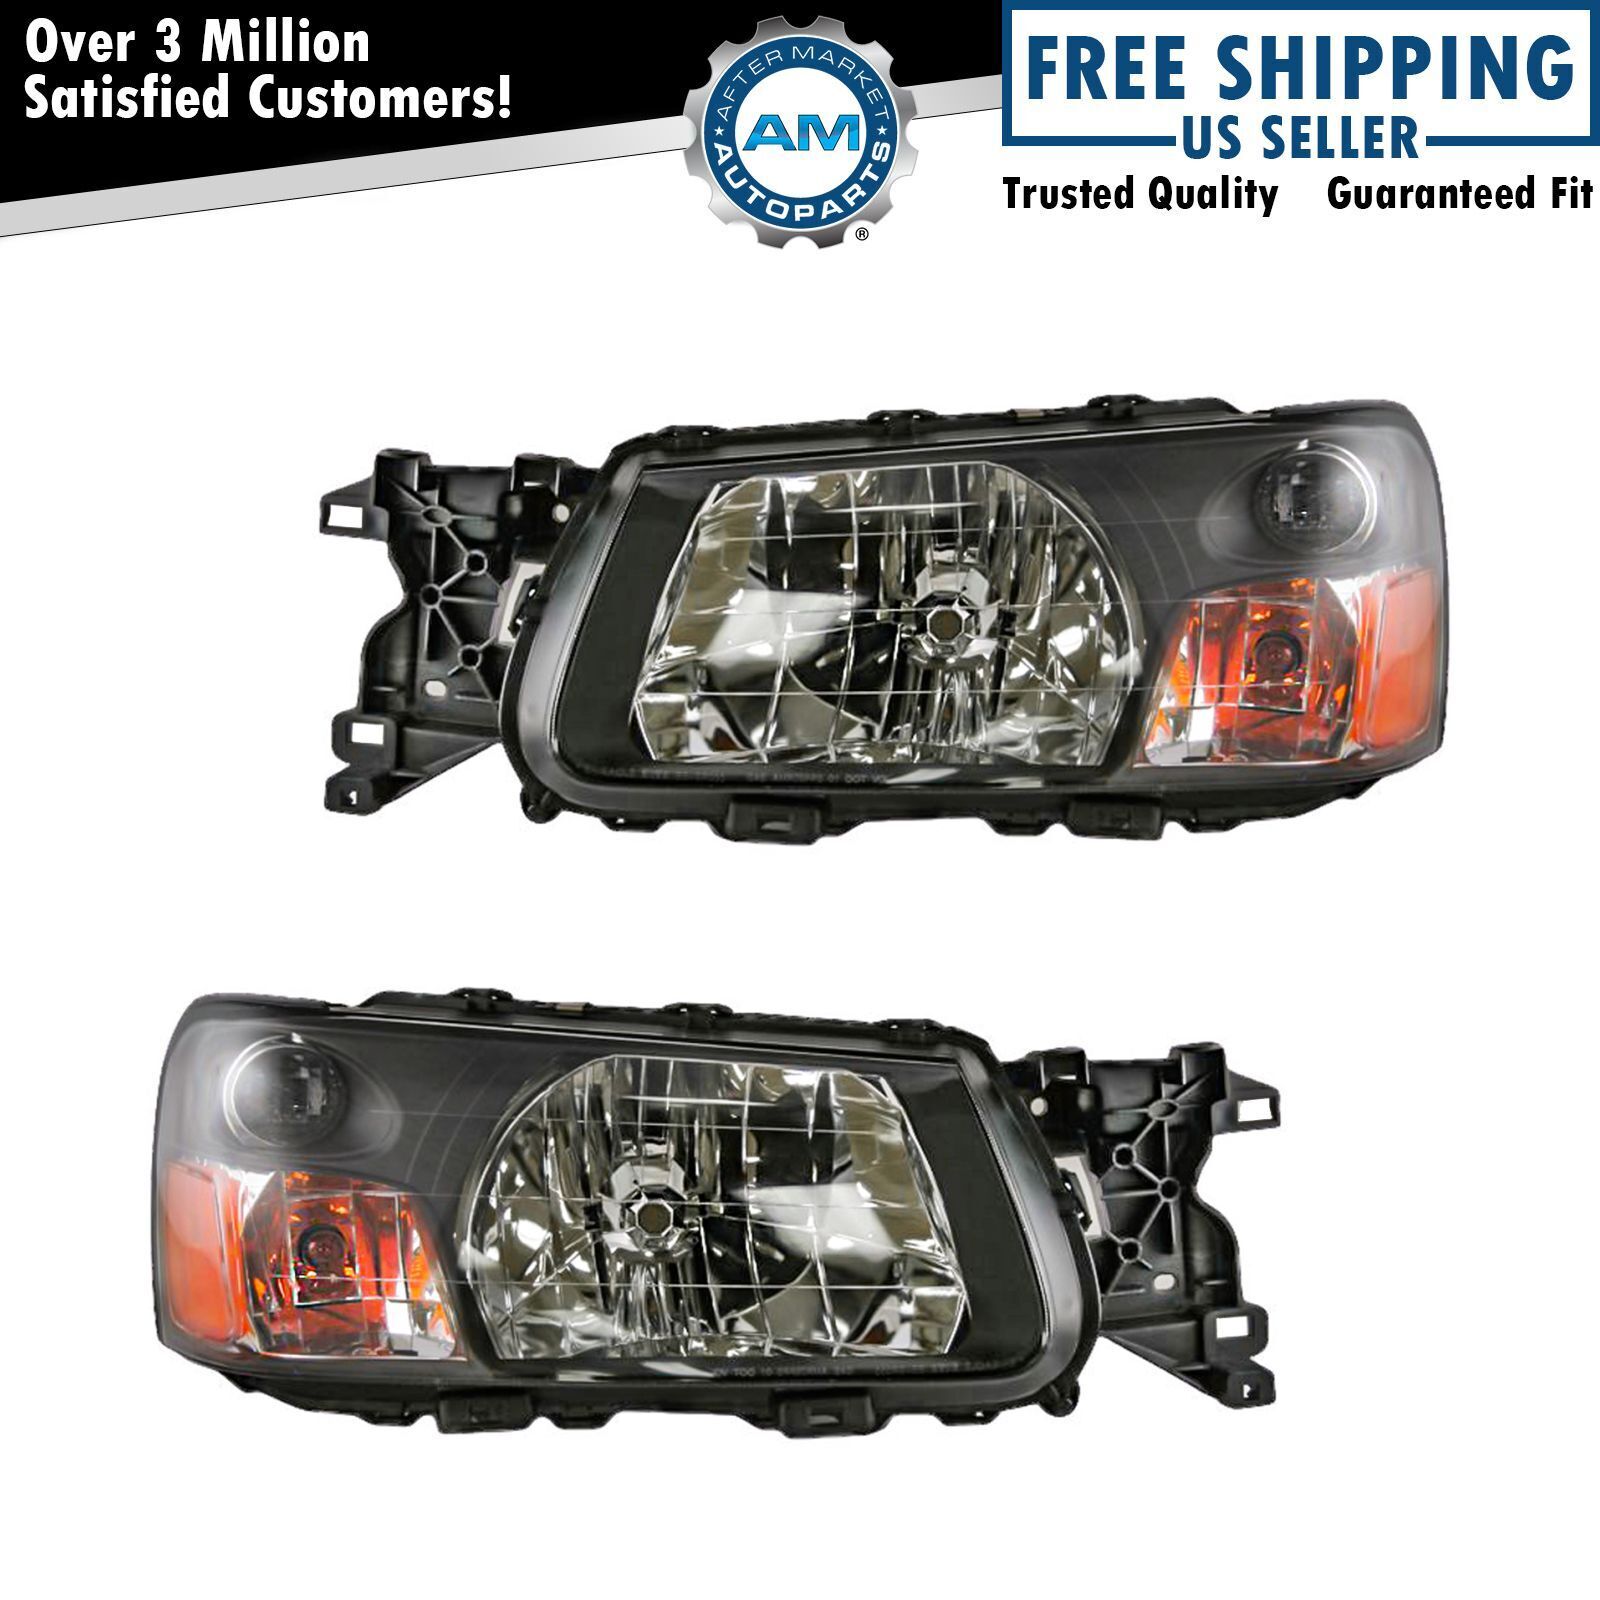 Headlights Headlamps Left & Right Pair Set NEW for 03-04 Subaru Forester